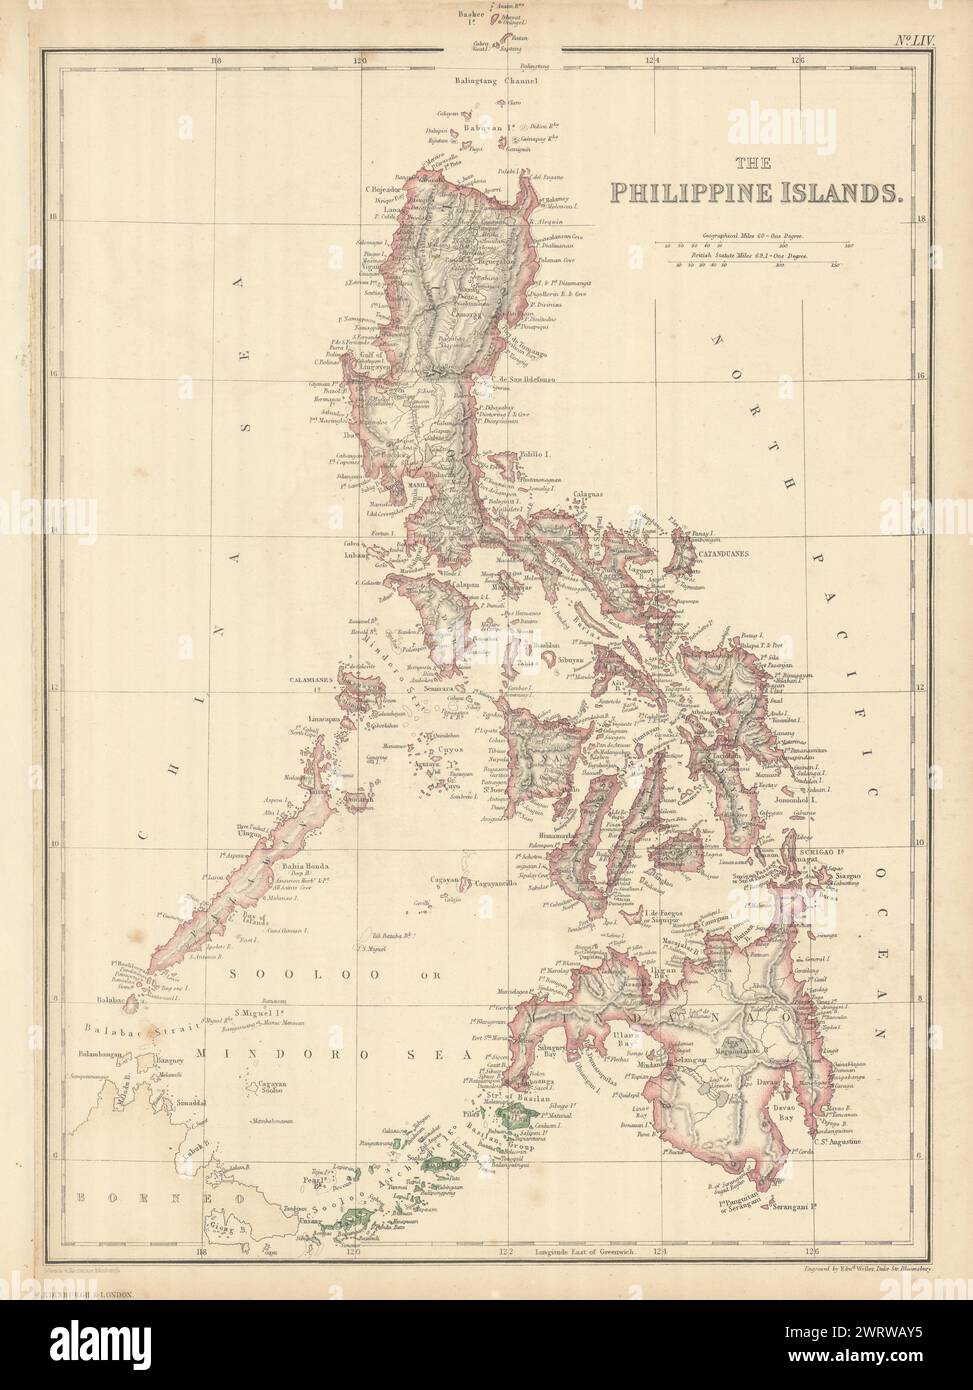 The Philippine Islands by Edward Weller. Philippines 1860 old antique map Stock Photo